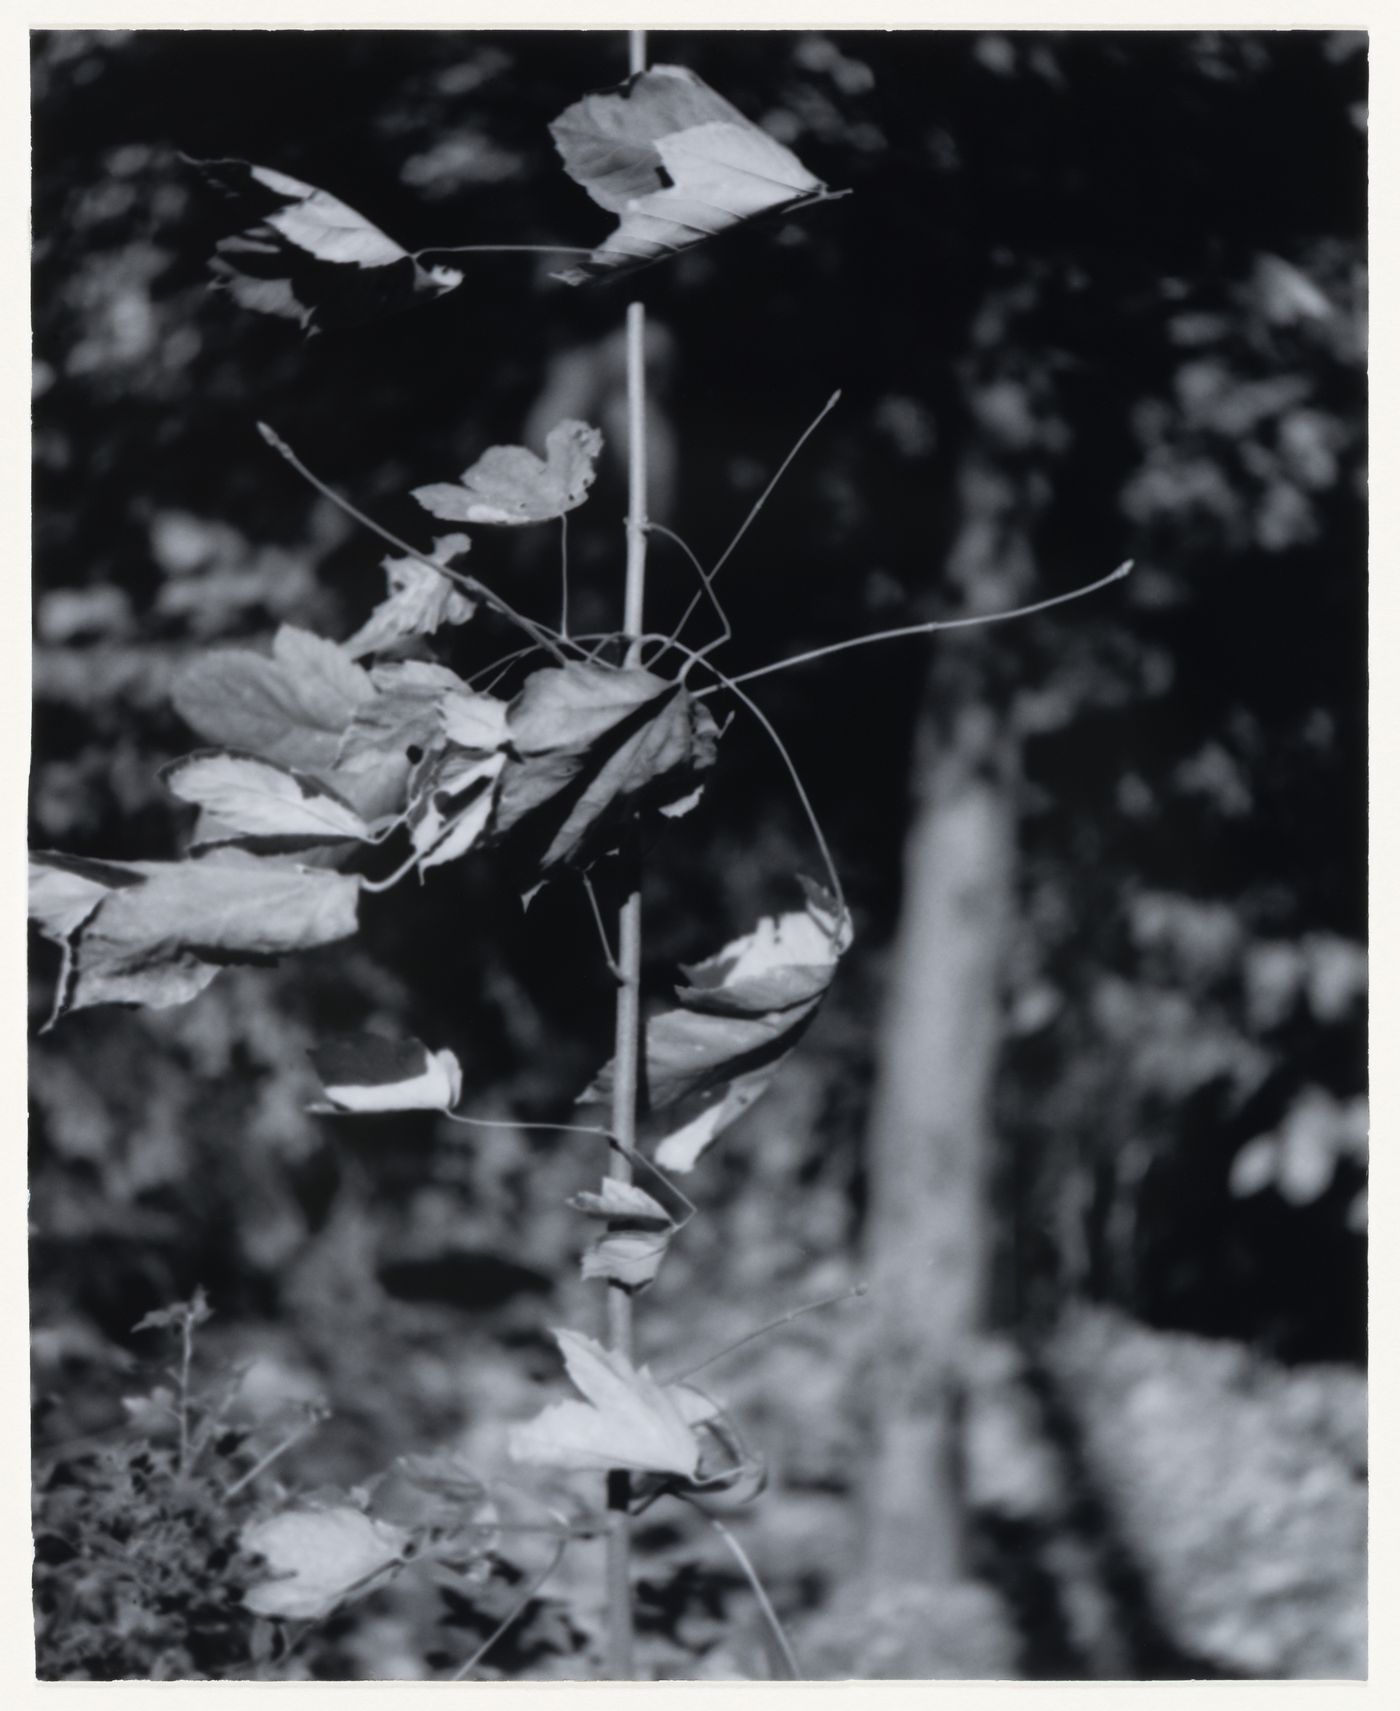 View of leaves, branches and trees, Berlin, Germany, from the artist book "The Potsdamer Project"